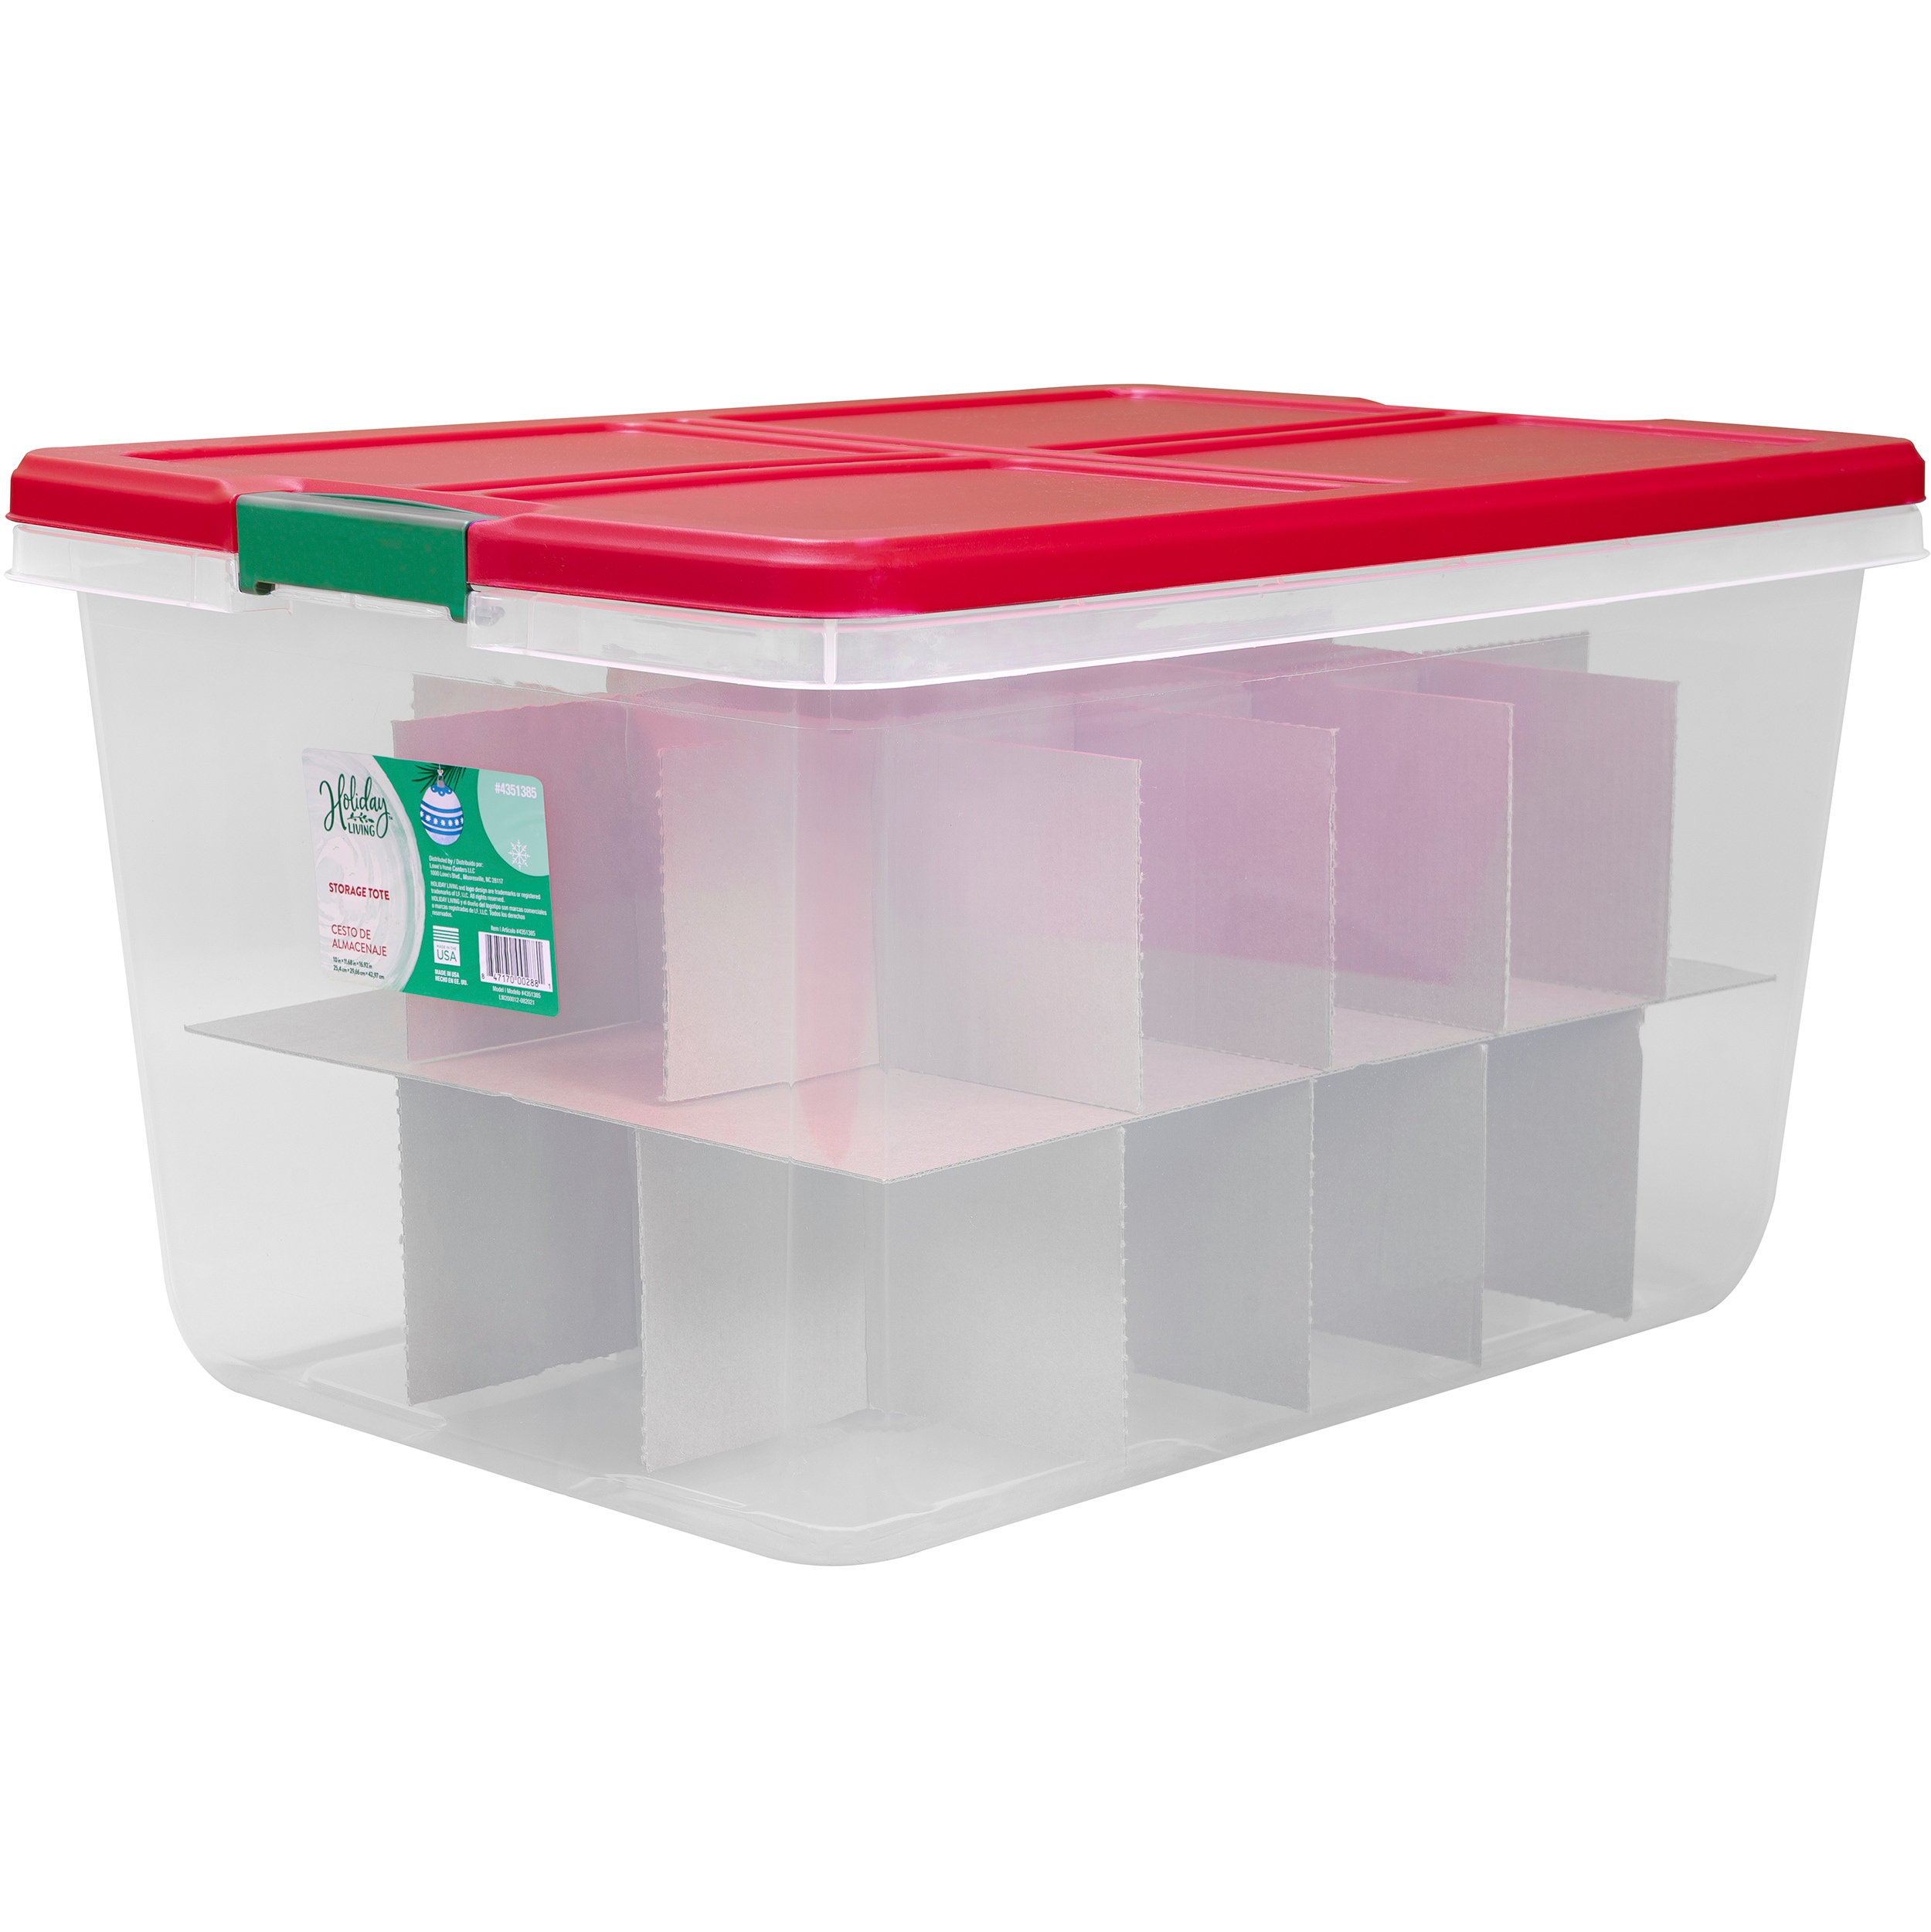 Hobby Lobby Holiday | Plastic Christmas Storage Container Nwt | Color: Red/White | Size: Os | Sonyaricklefs's Closet